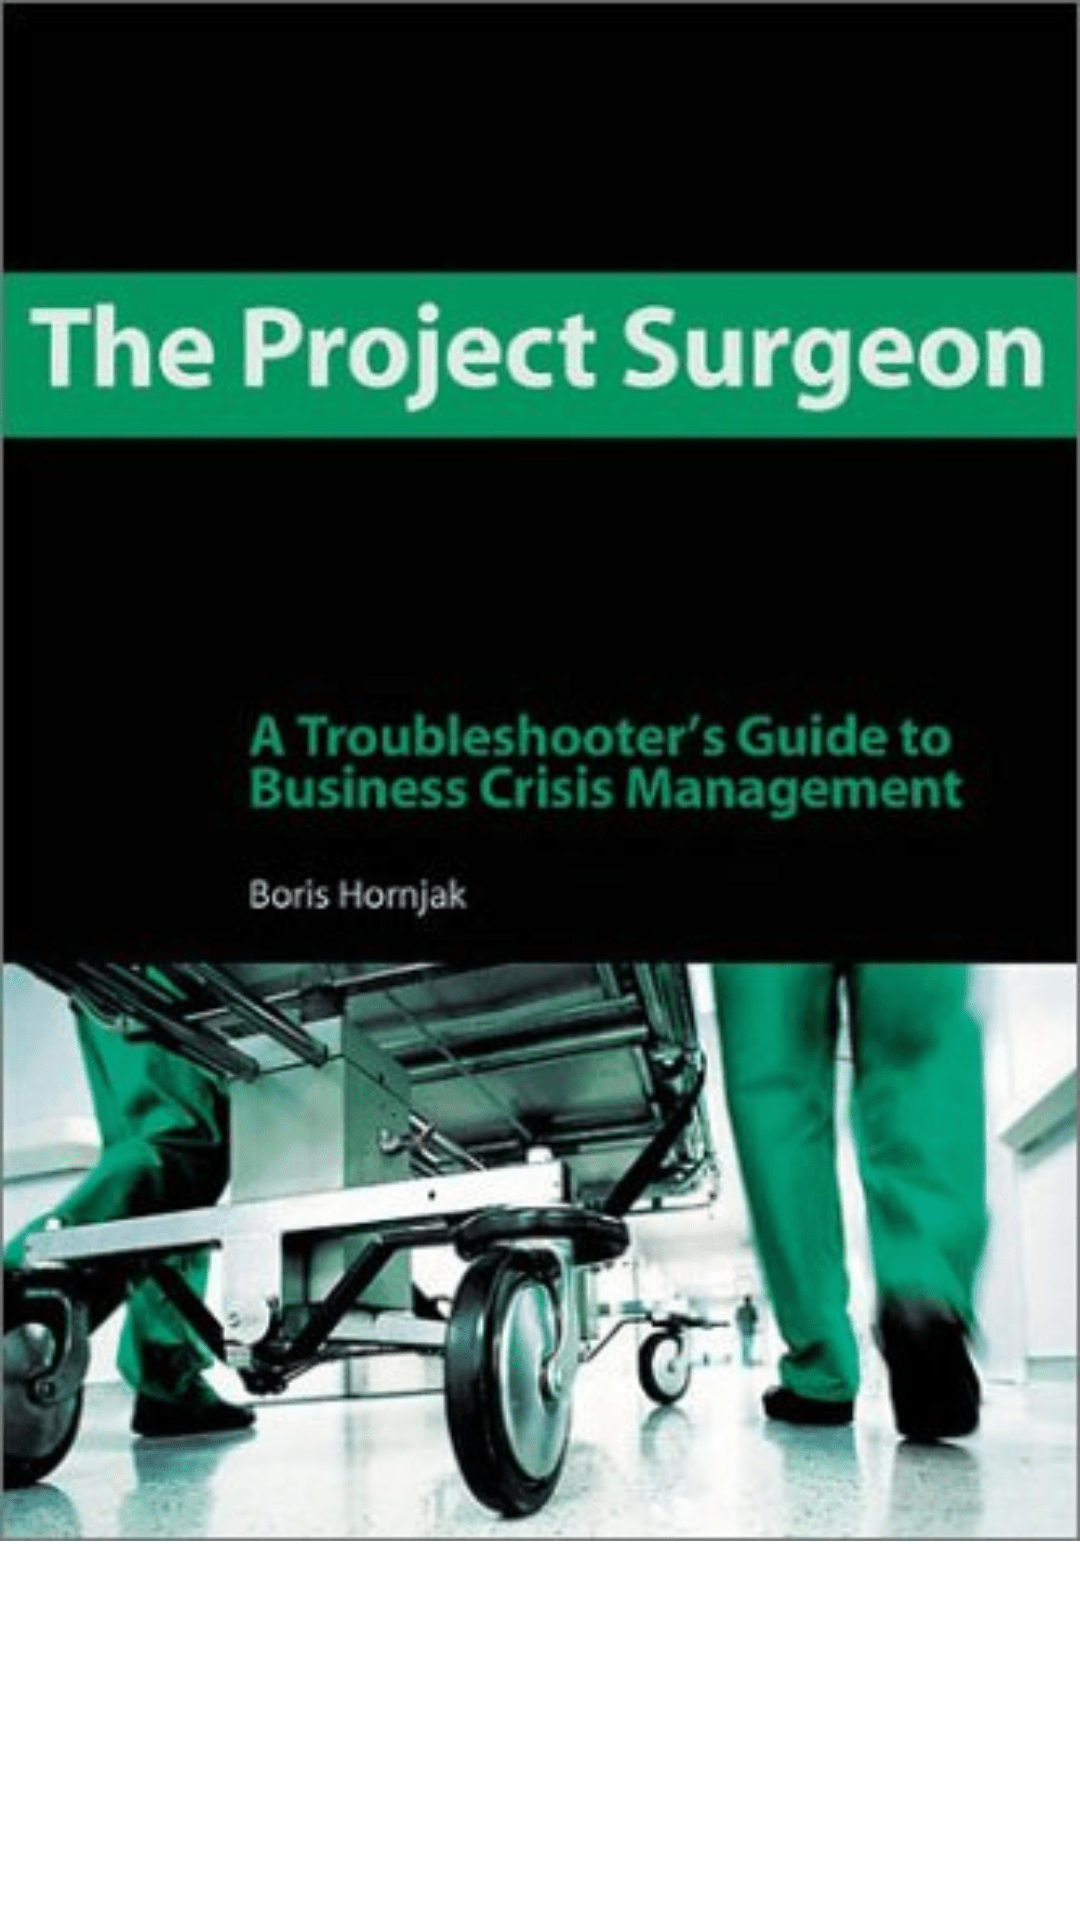 The Project Surgeon: A Troubleshooter's Guide to Business Crisis Management